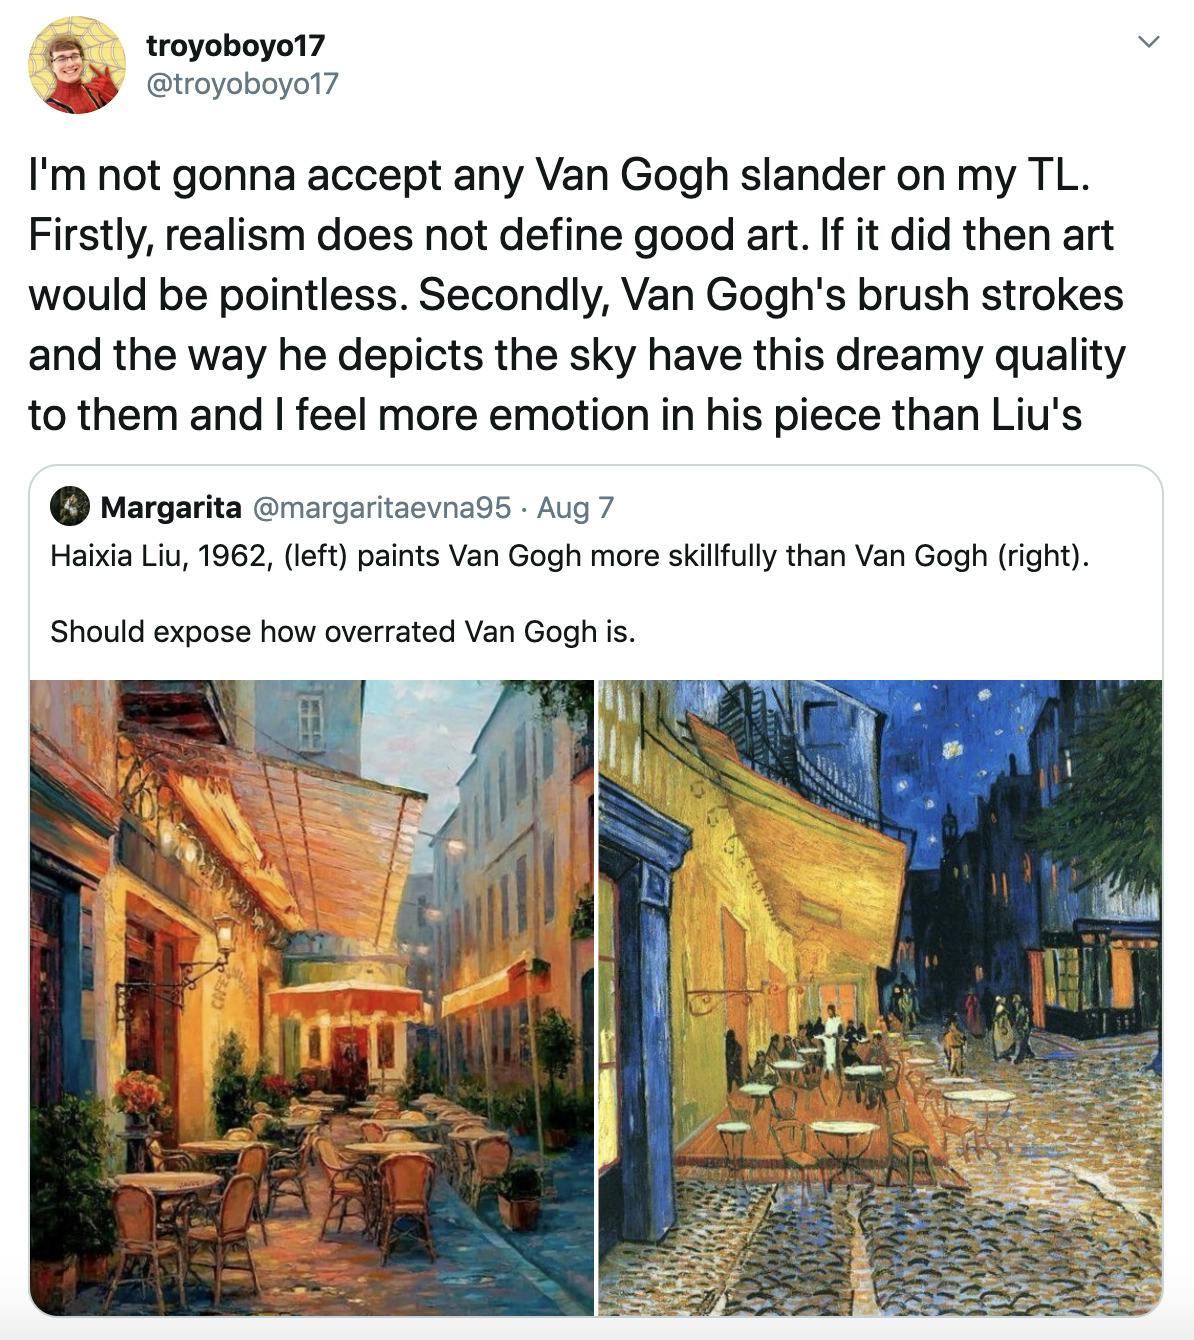 "I'm not gonna accept any Van Gogh slander on my TL. Firstly, realism does not define good art. If it did then art would be pointless. Secondly, Van Gogh's brush strokes and the way he depicts the sky have this dreamy quality to them and I feel more emotion in his piece than Liu's" screenshot of the original tweet